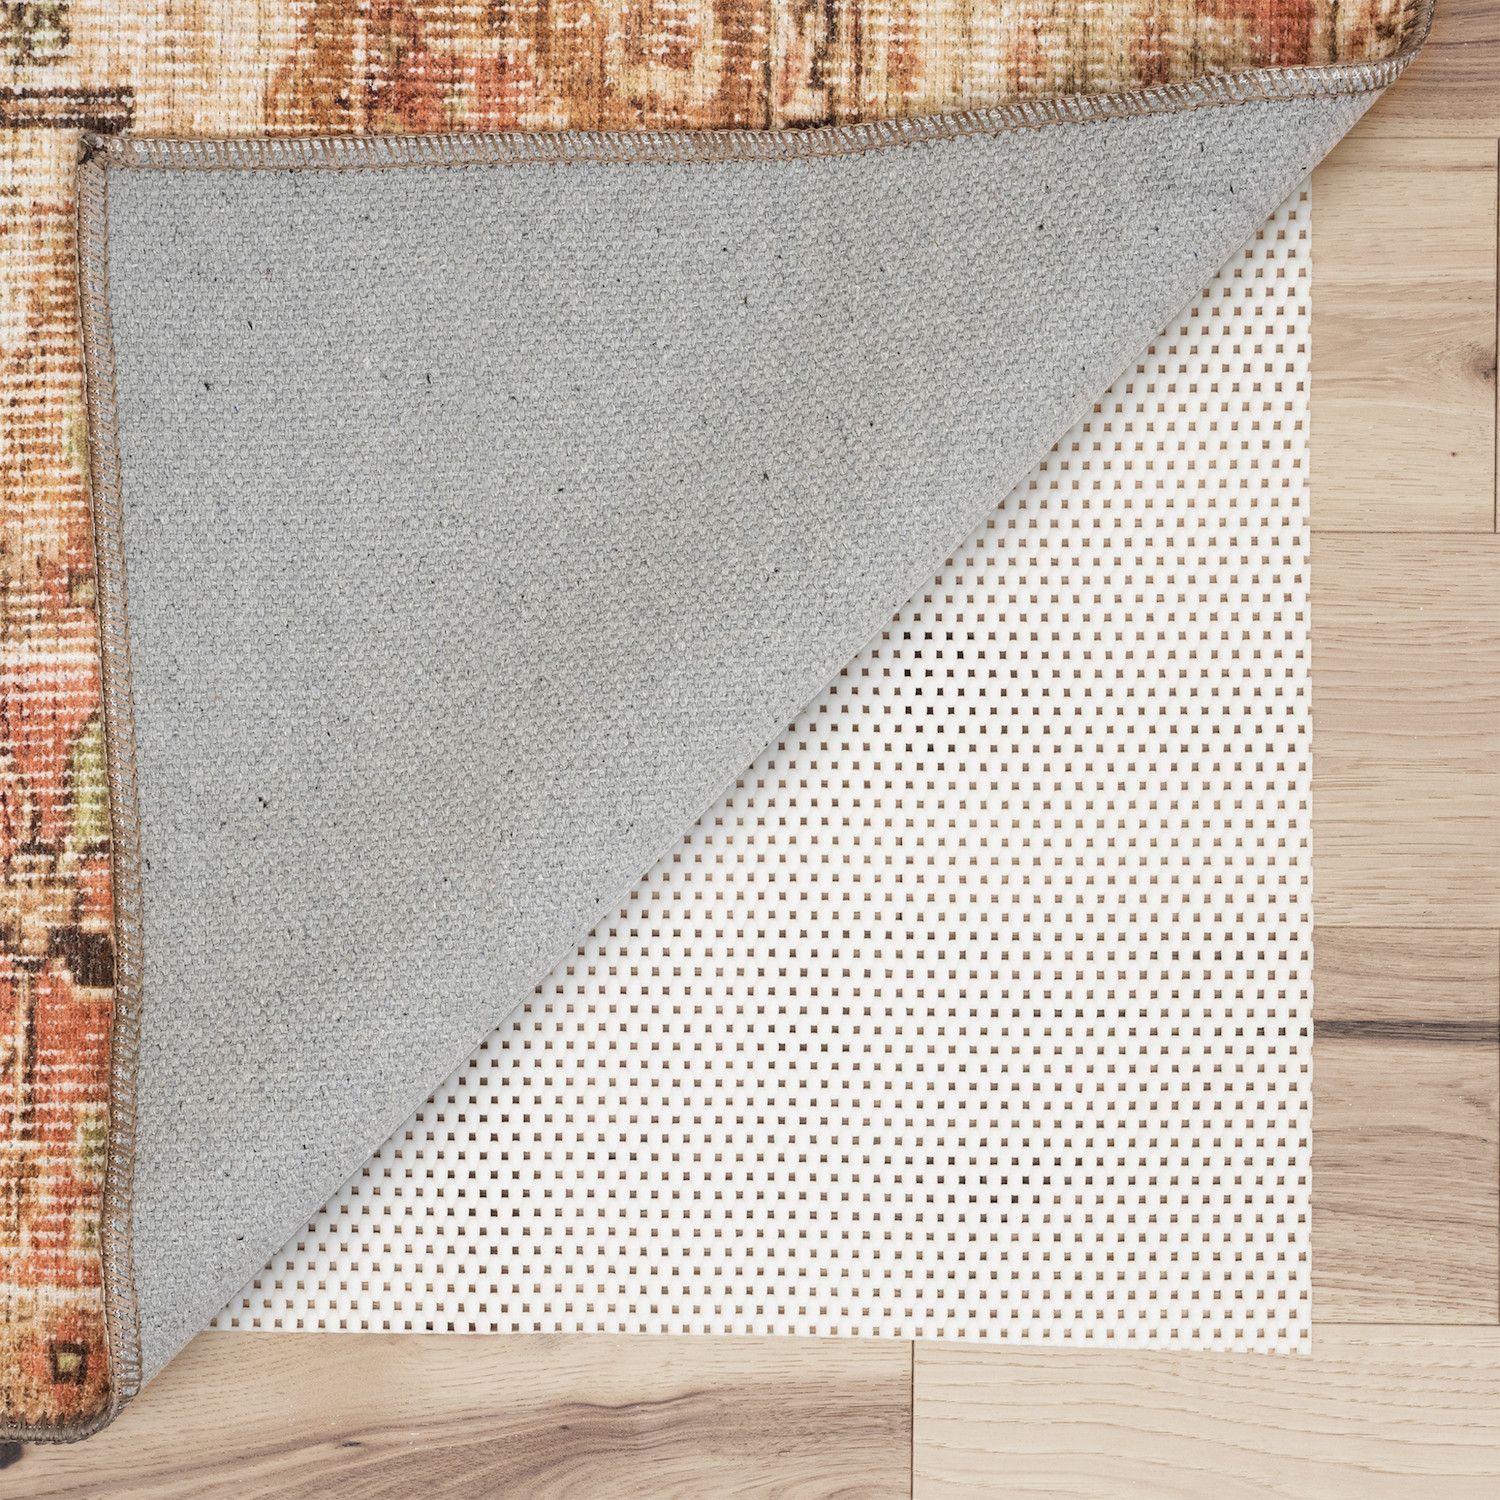 Mohawk Home All Purpose Rug Pad, Grey, 2x12 ft